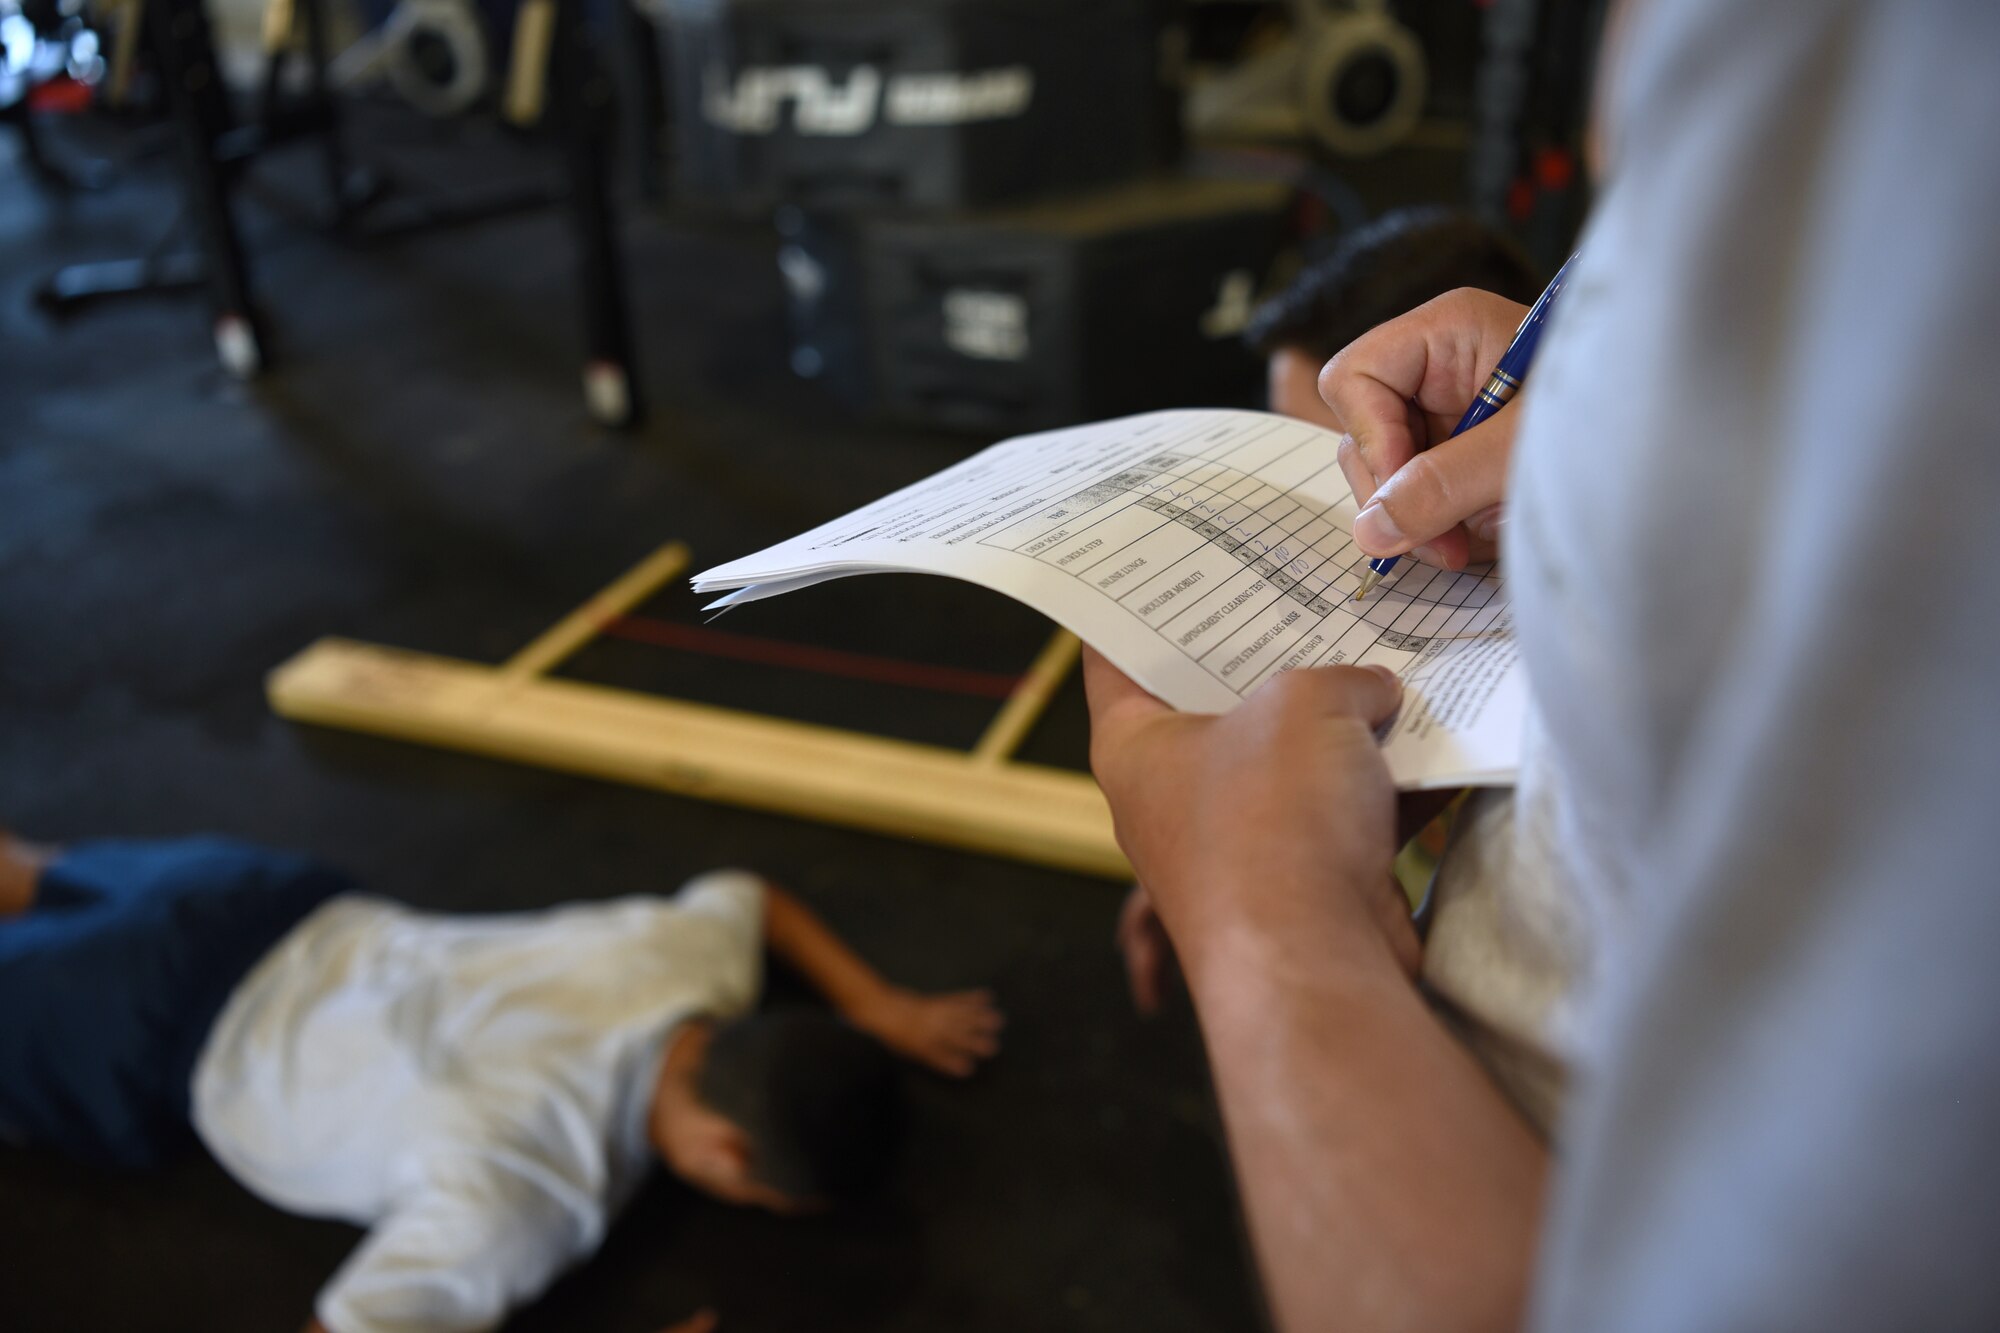 A student assigned to the 312th Training Squadron records the functional movements of another student during an evaluation on Goodfellow Air Force Base, Texas, June 30, 2021. Joint service members were evaluated before starting their firefighting training to identify biopsychosocial factors that could detract from the success of their training. (U.S. Air Force photo by Senior Airman Abbey Rieves)